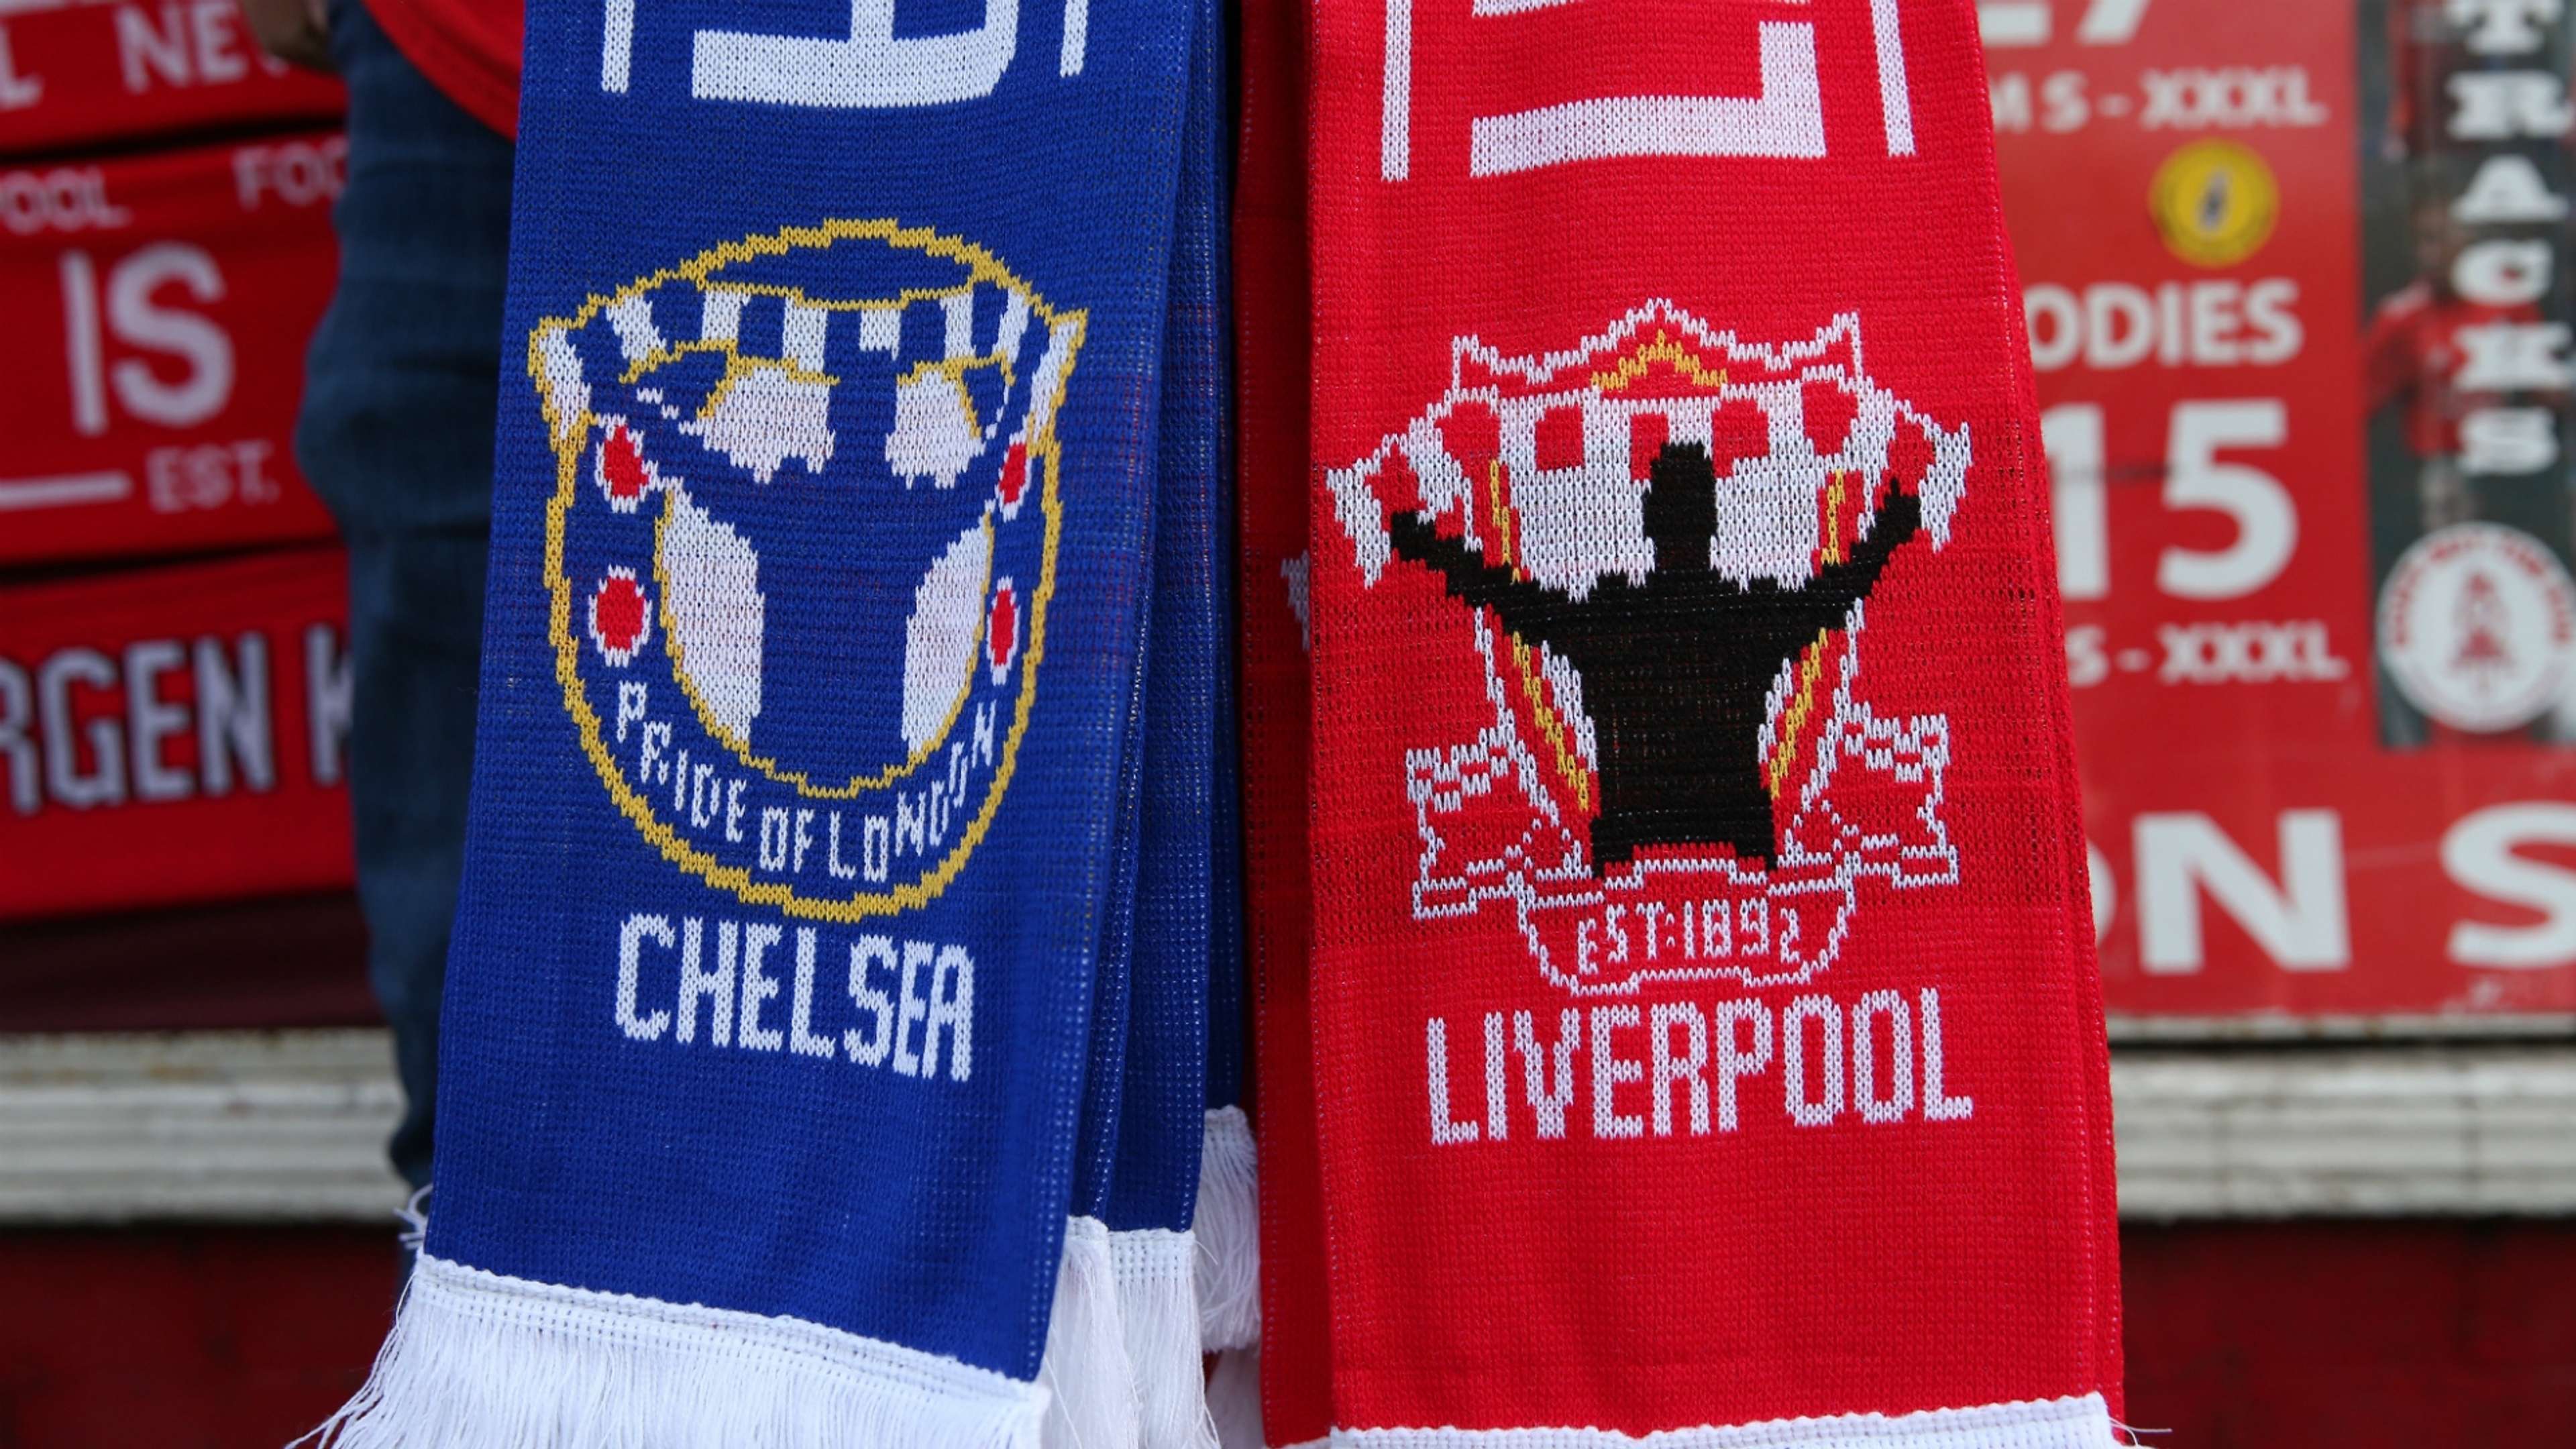 Chelsea Liverpool scarf